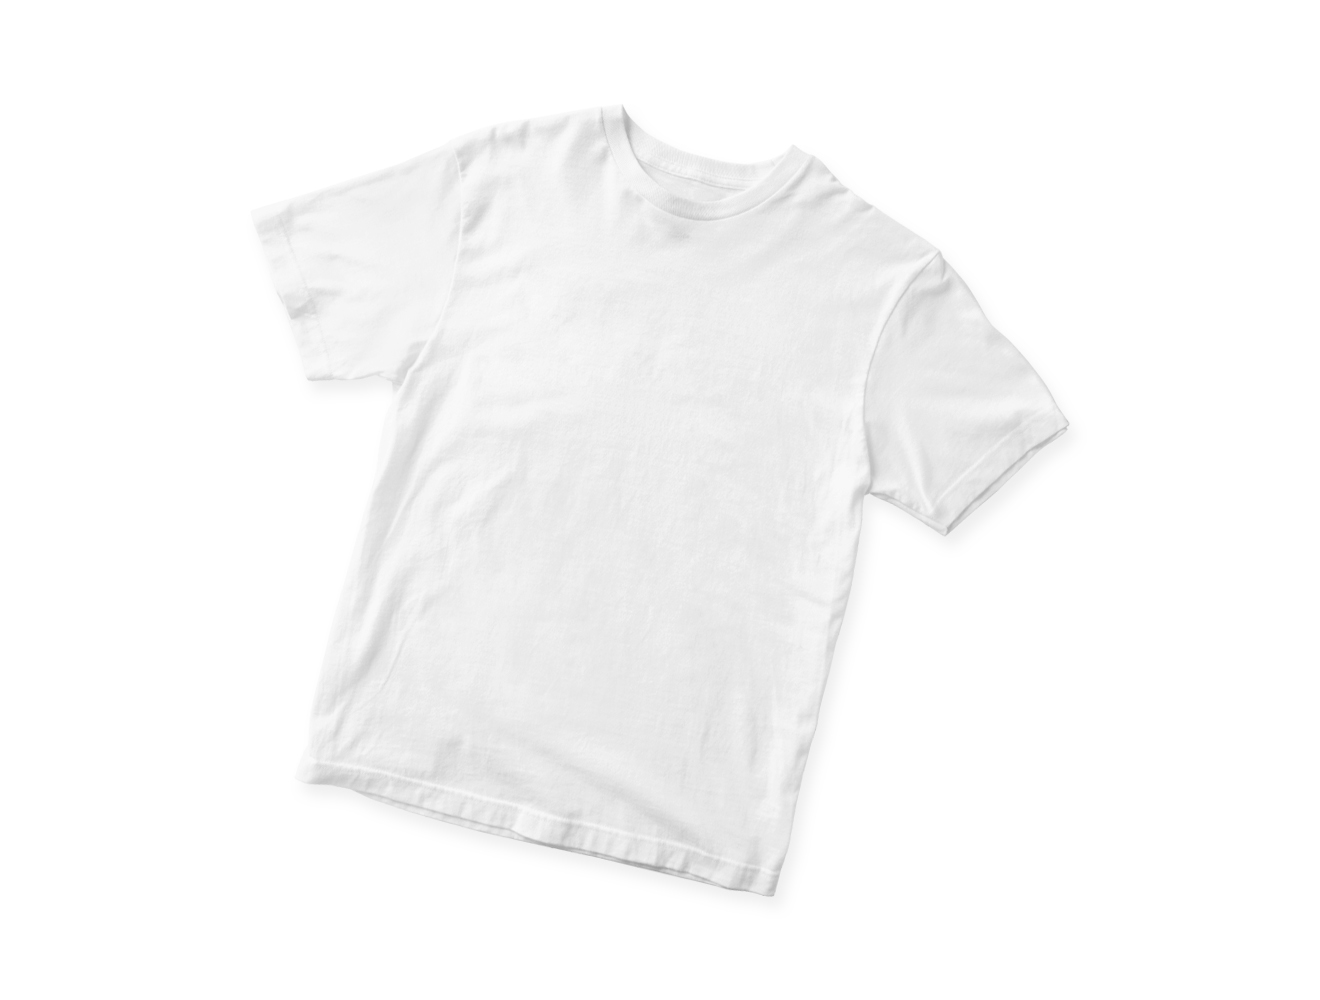 Sublimation T-Shirt for Adults size L - White